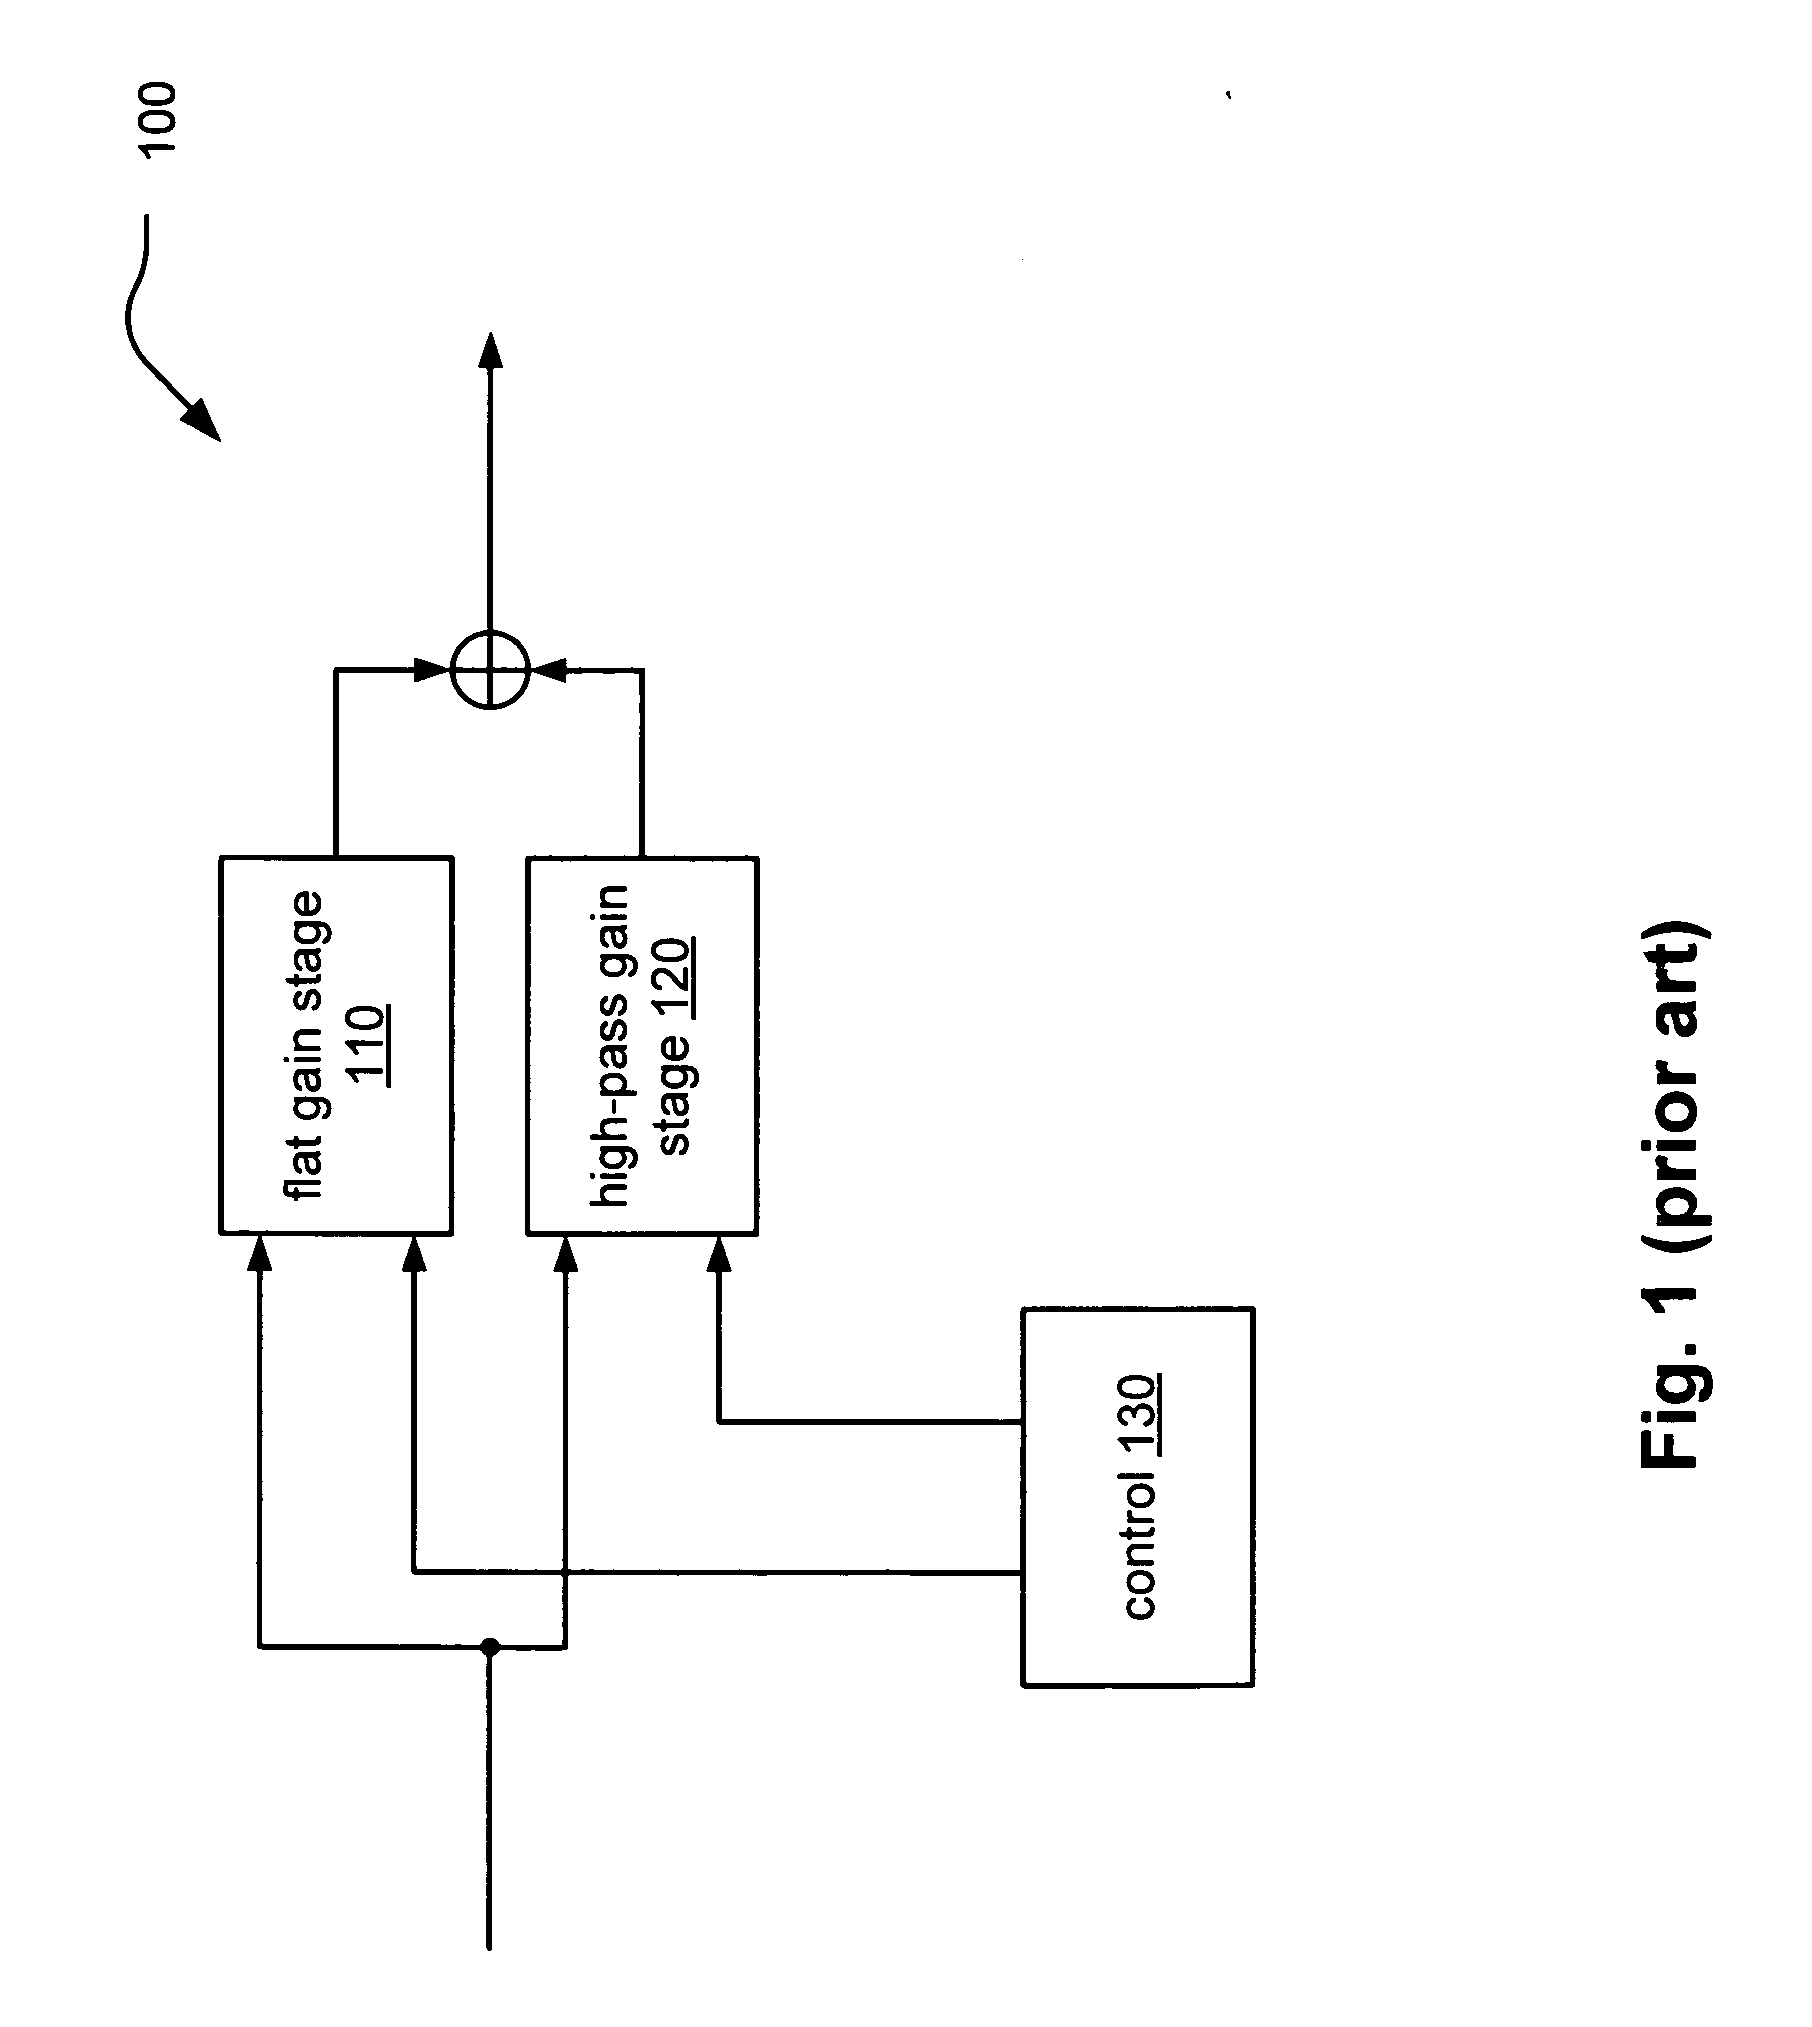 Current-controlled CMOS (C3MOS) fully differential integrated wideband amplifier/equalizer with adjustable gain and frequency response without additional power or loading